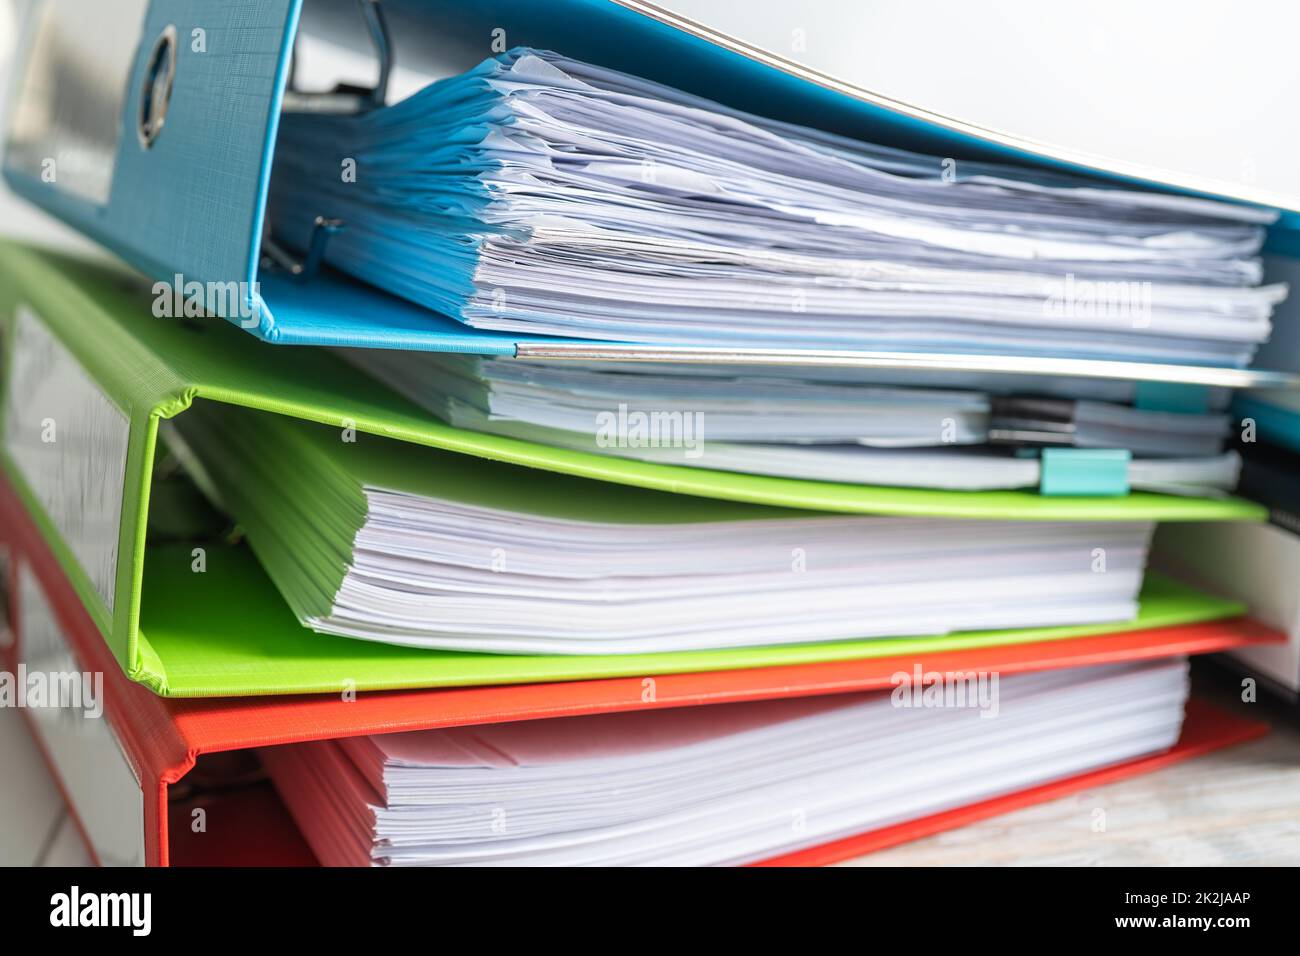 File Folder Binder stack of multi color on table in business office. Stock Photo